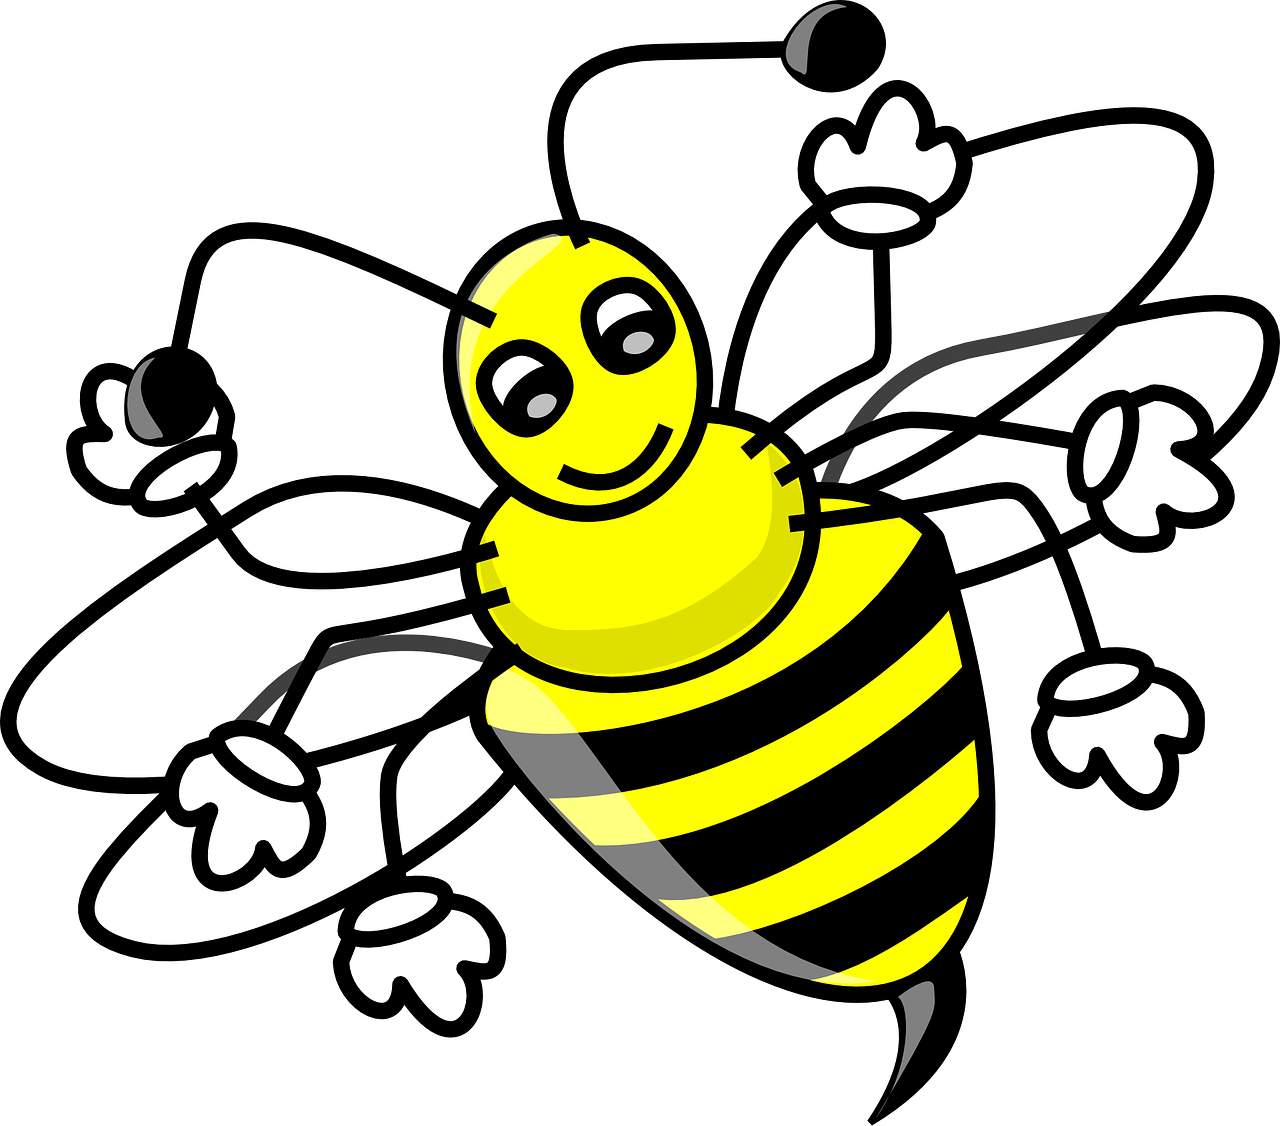 bee,honey,wings,stinger,insect,bug,cute,free vector graphics,free pictures, free photos, free images, royalty free, free illustrations, public domain